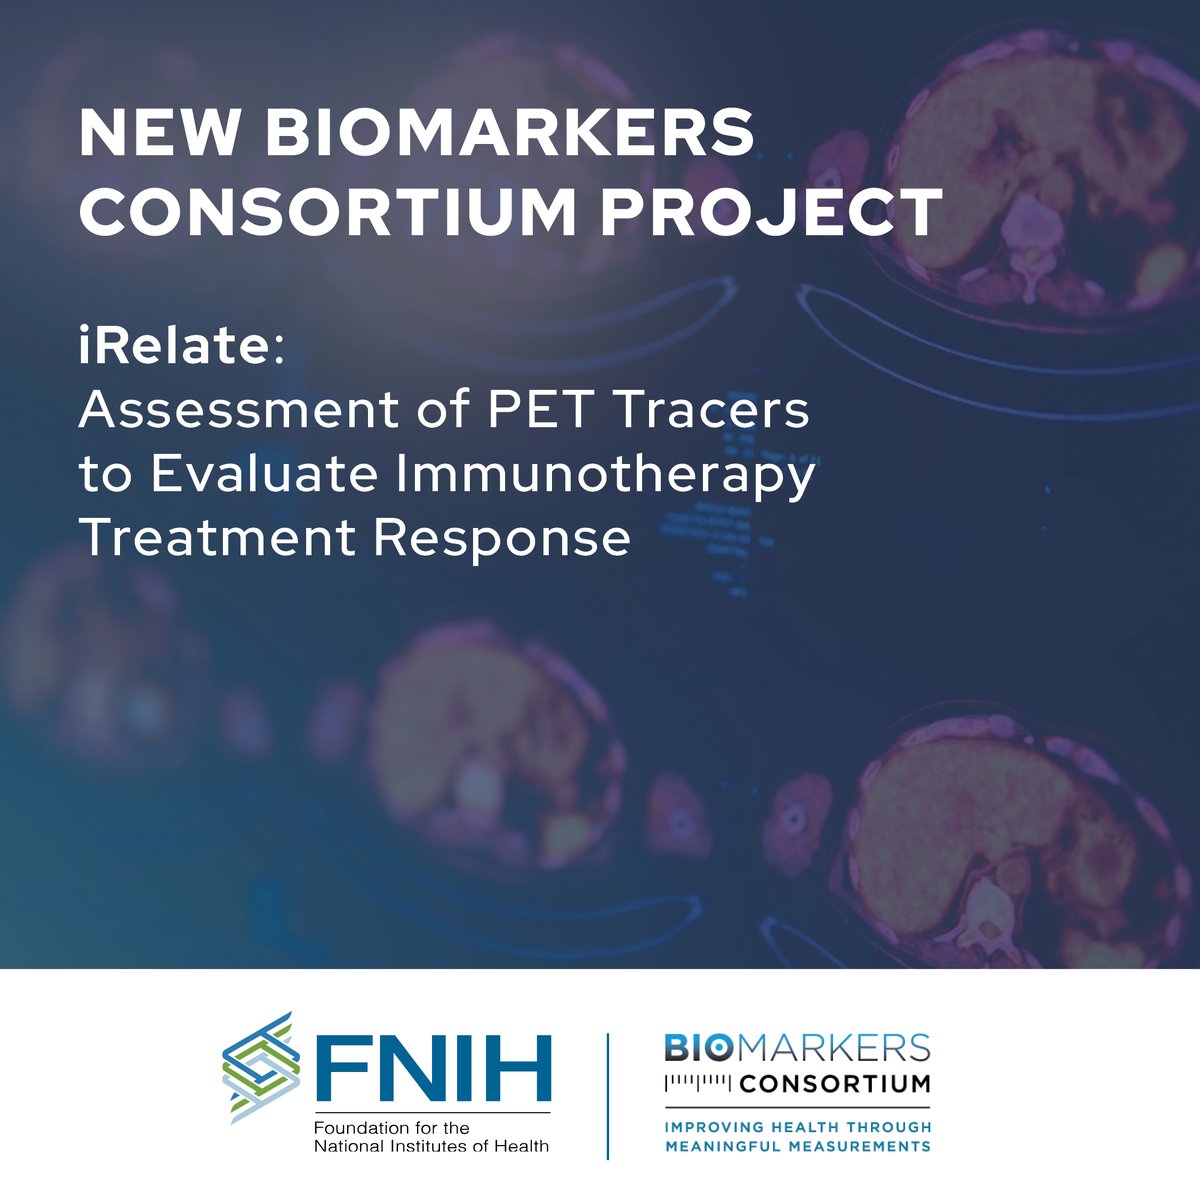 The Biomarkers Consortium announces the launch of a new project (iRelate) to support noninvasive evaluation of tumors and immune response in non-small cell lung cancer patients using medical imaging. Learn more about the project here: bit.ly/3TEyb1f